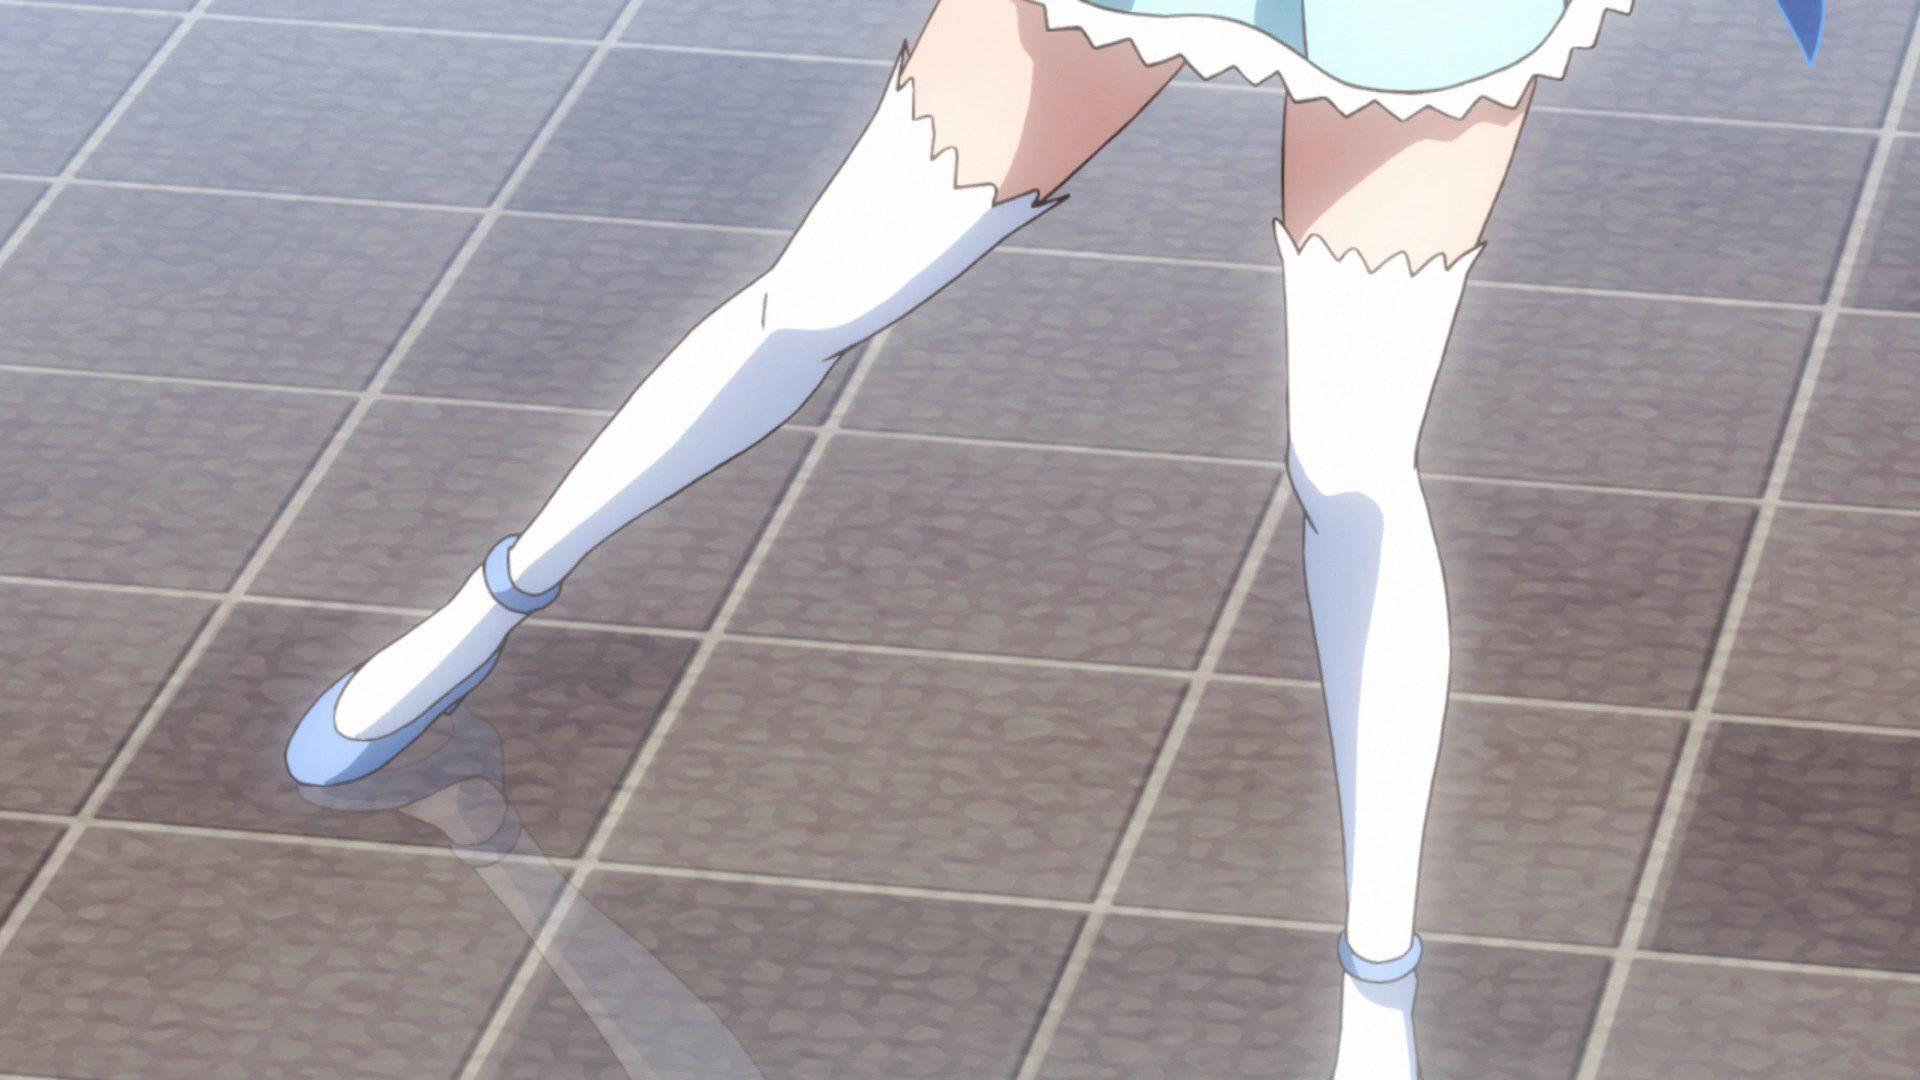 [God images] "love live! ' Μm ' PV's leg is too erotic everyone wakes up to a leg fetish of wwwww 61